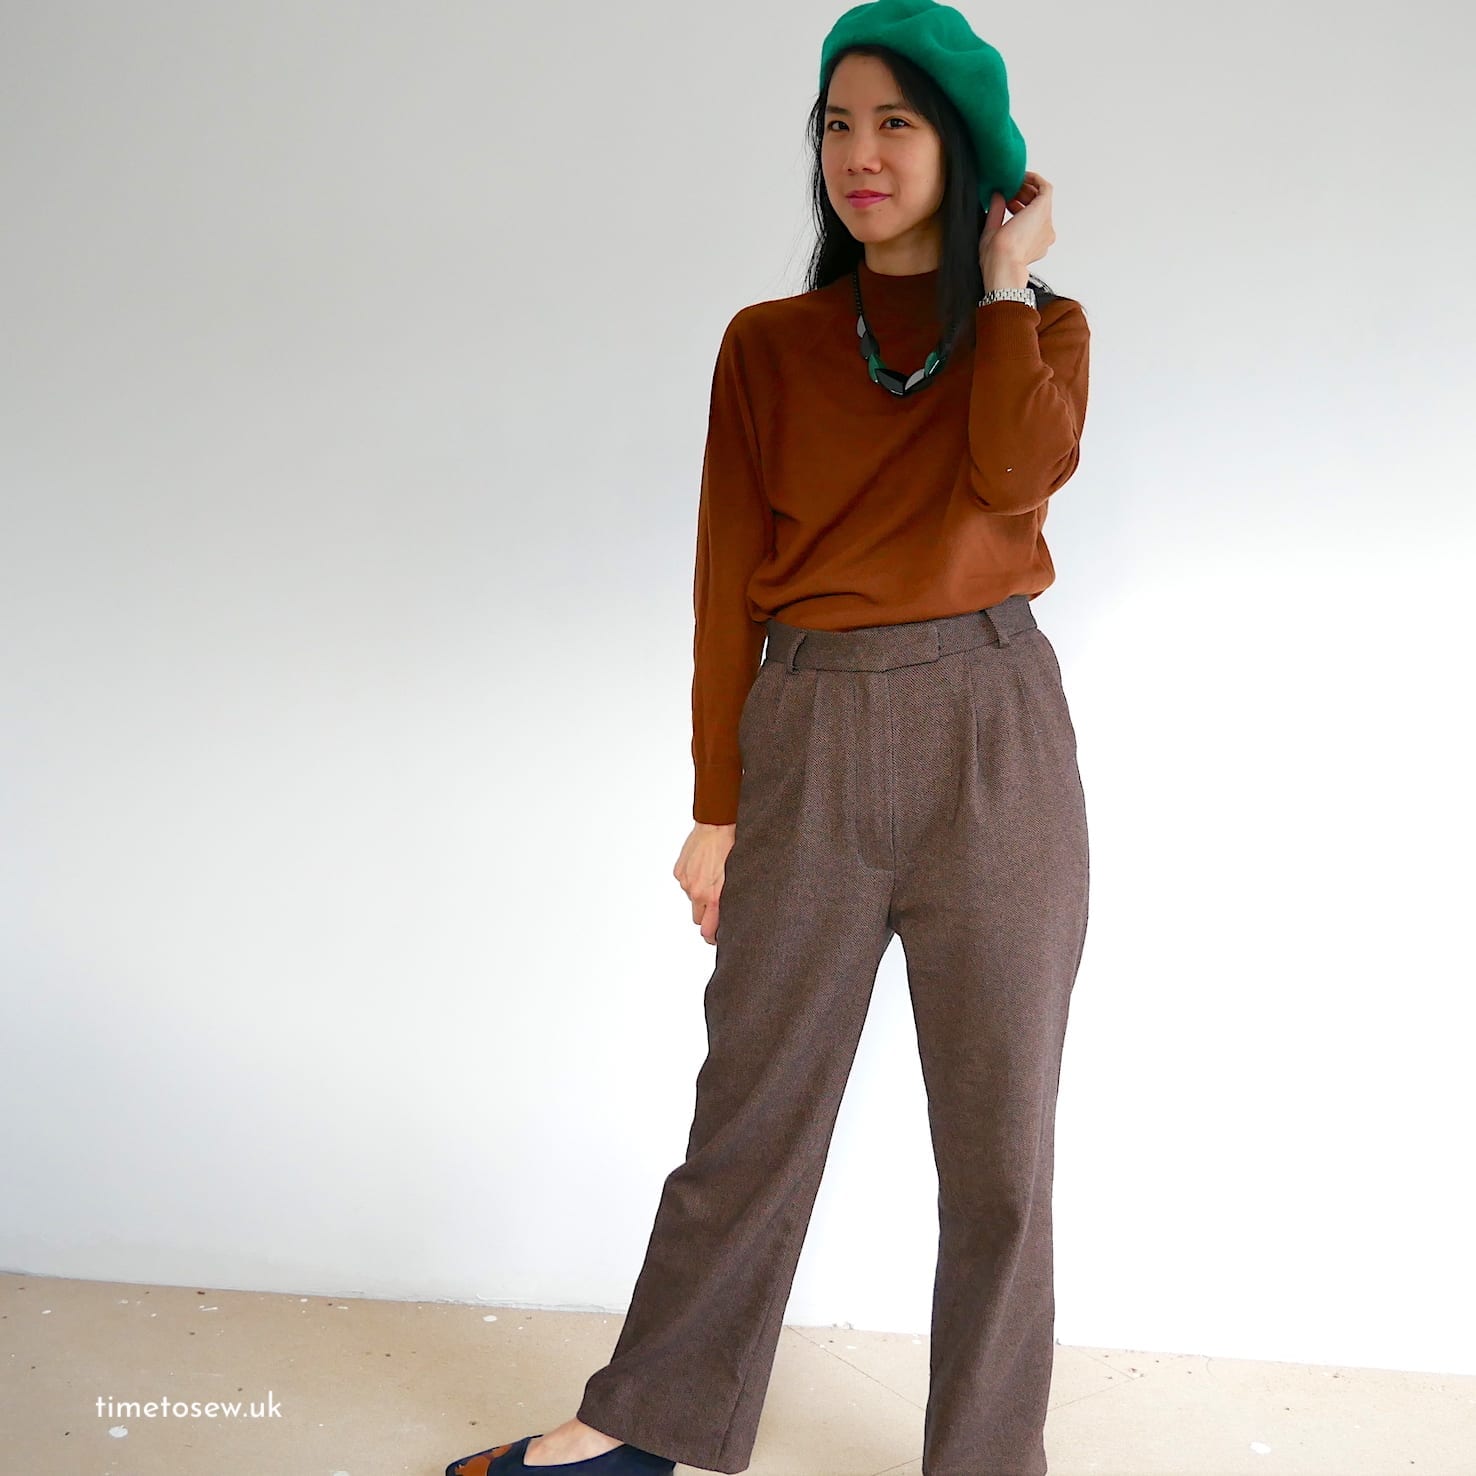 Just Patterns Tatjana in wool by Time to Sew - brown wool trousers accessorised with a green beret